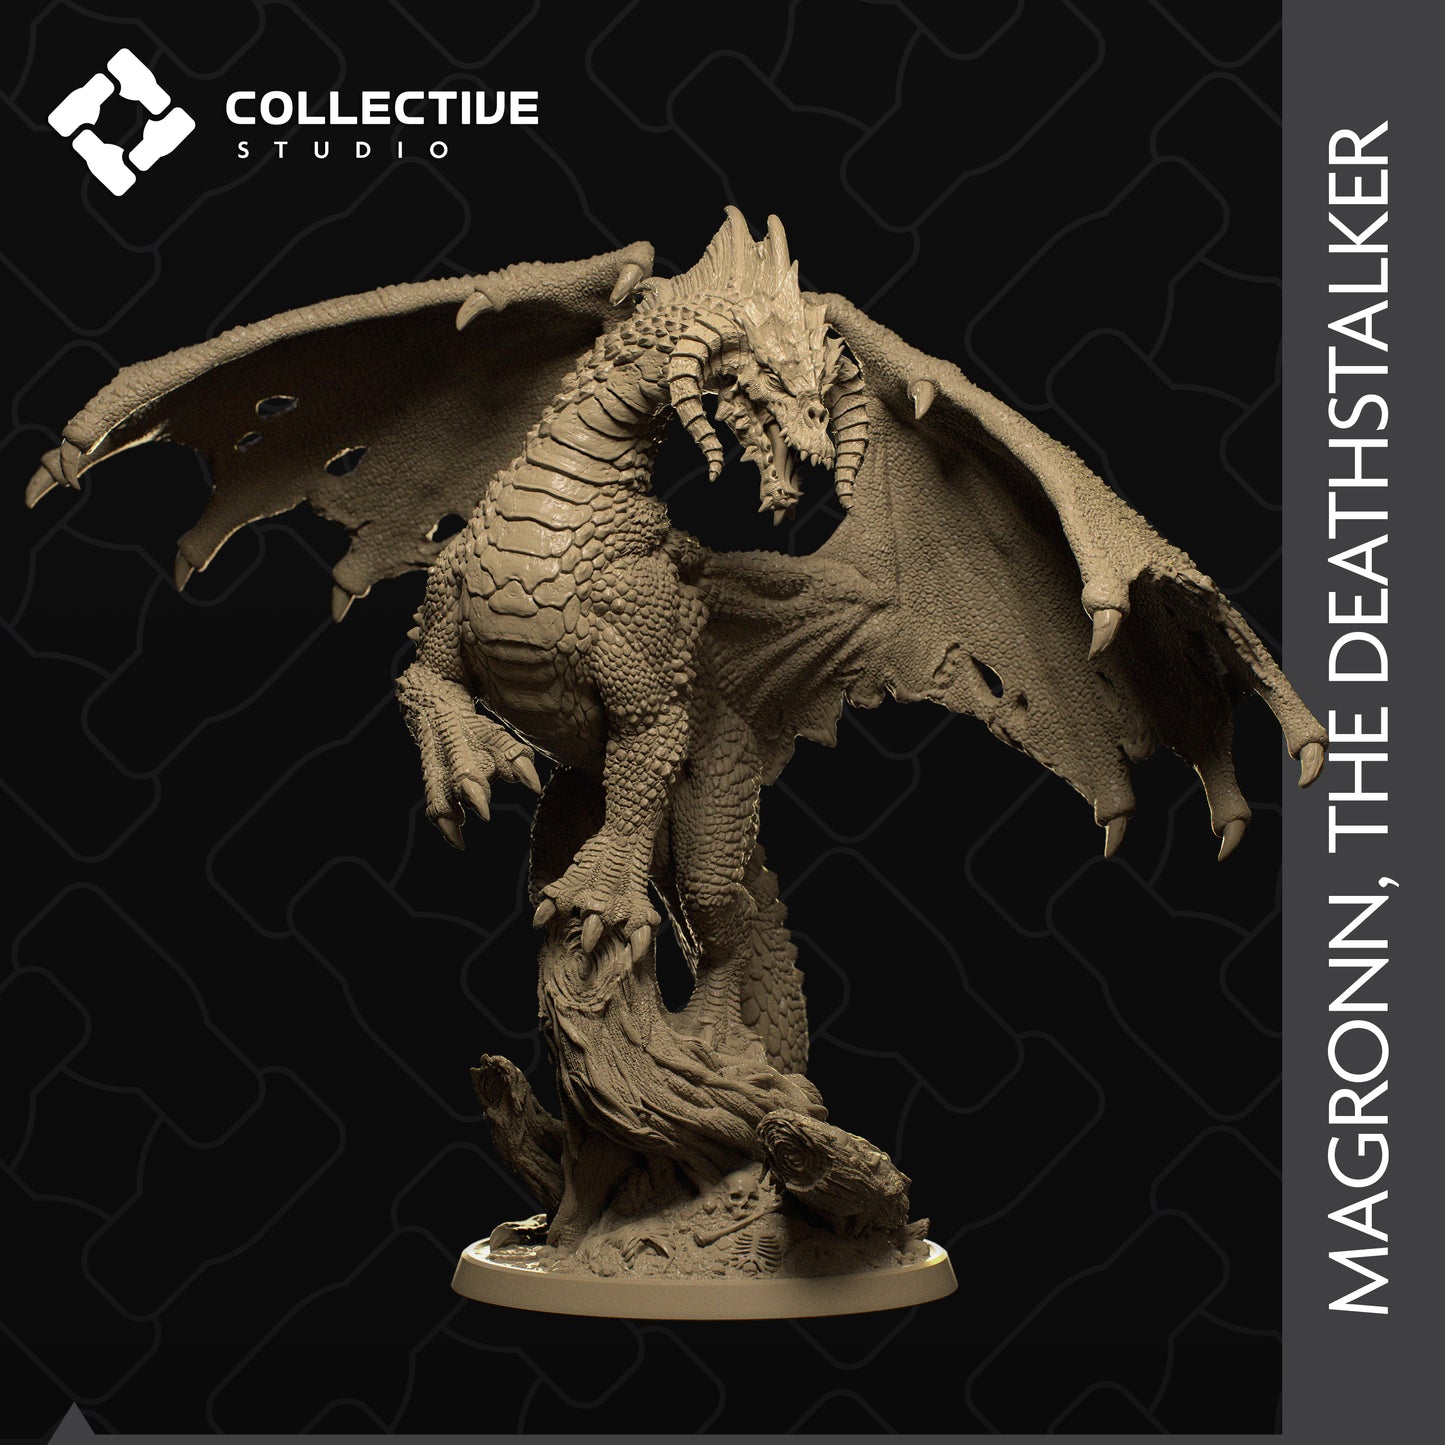 Magronn The Deathstalker - Drache Boss Miniatur | Dungeons and Dragons | Tabletop | D&D | Collective Studio